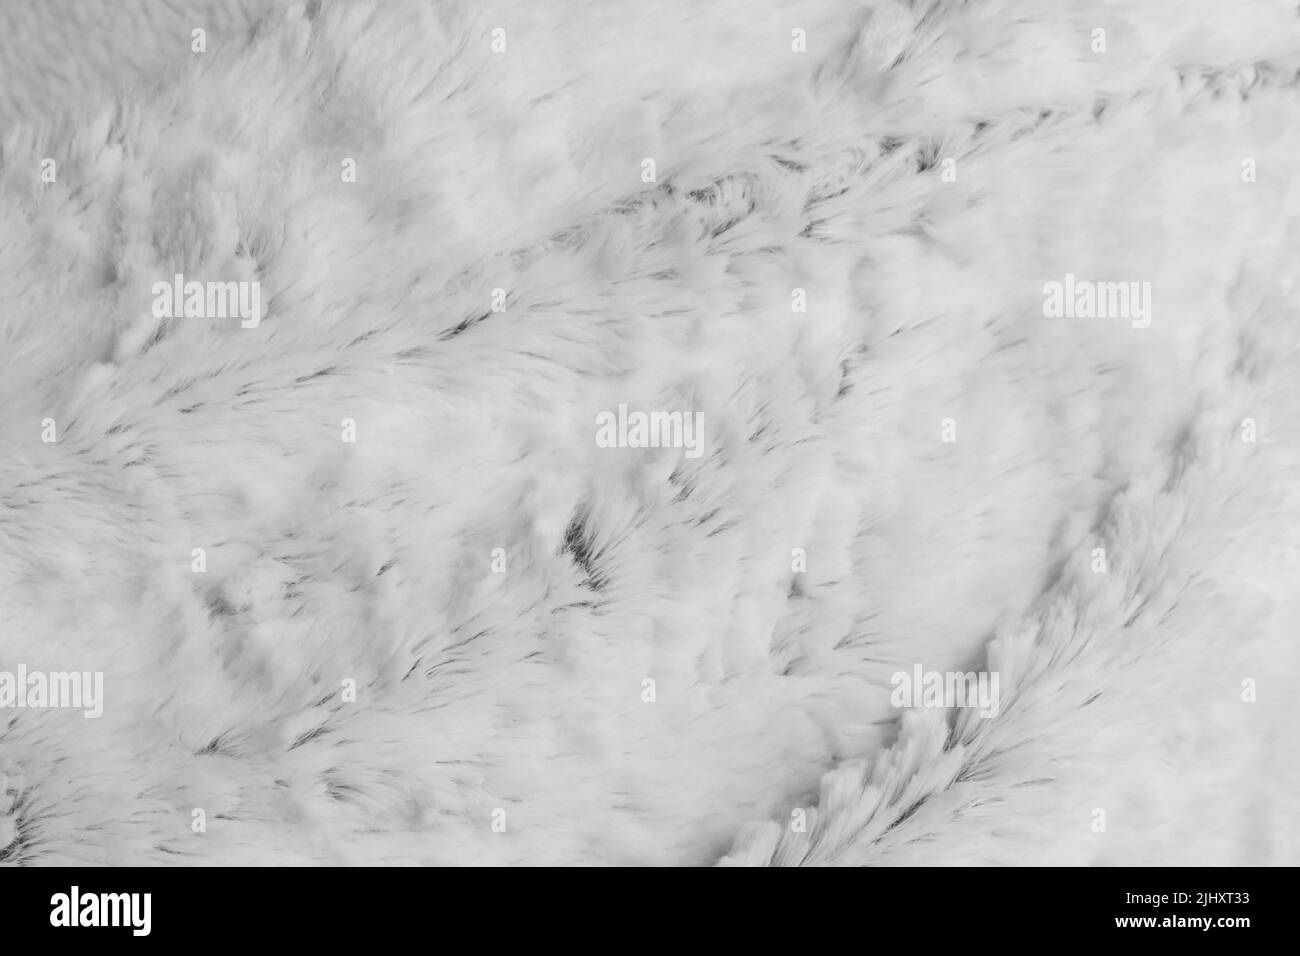 White wool texture fur background pattern warm abstract soft material fluffy animal nature skin light. Stock Photo